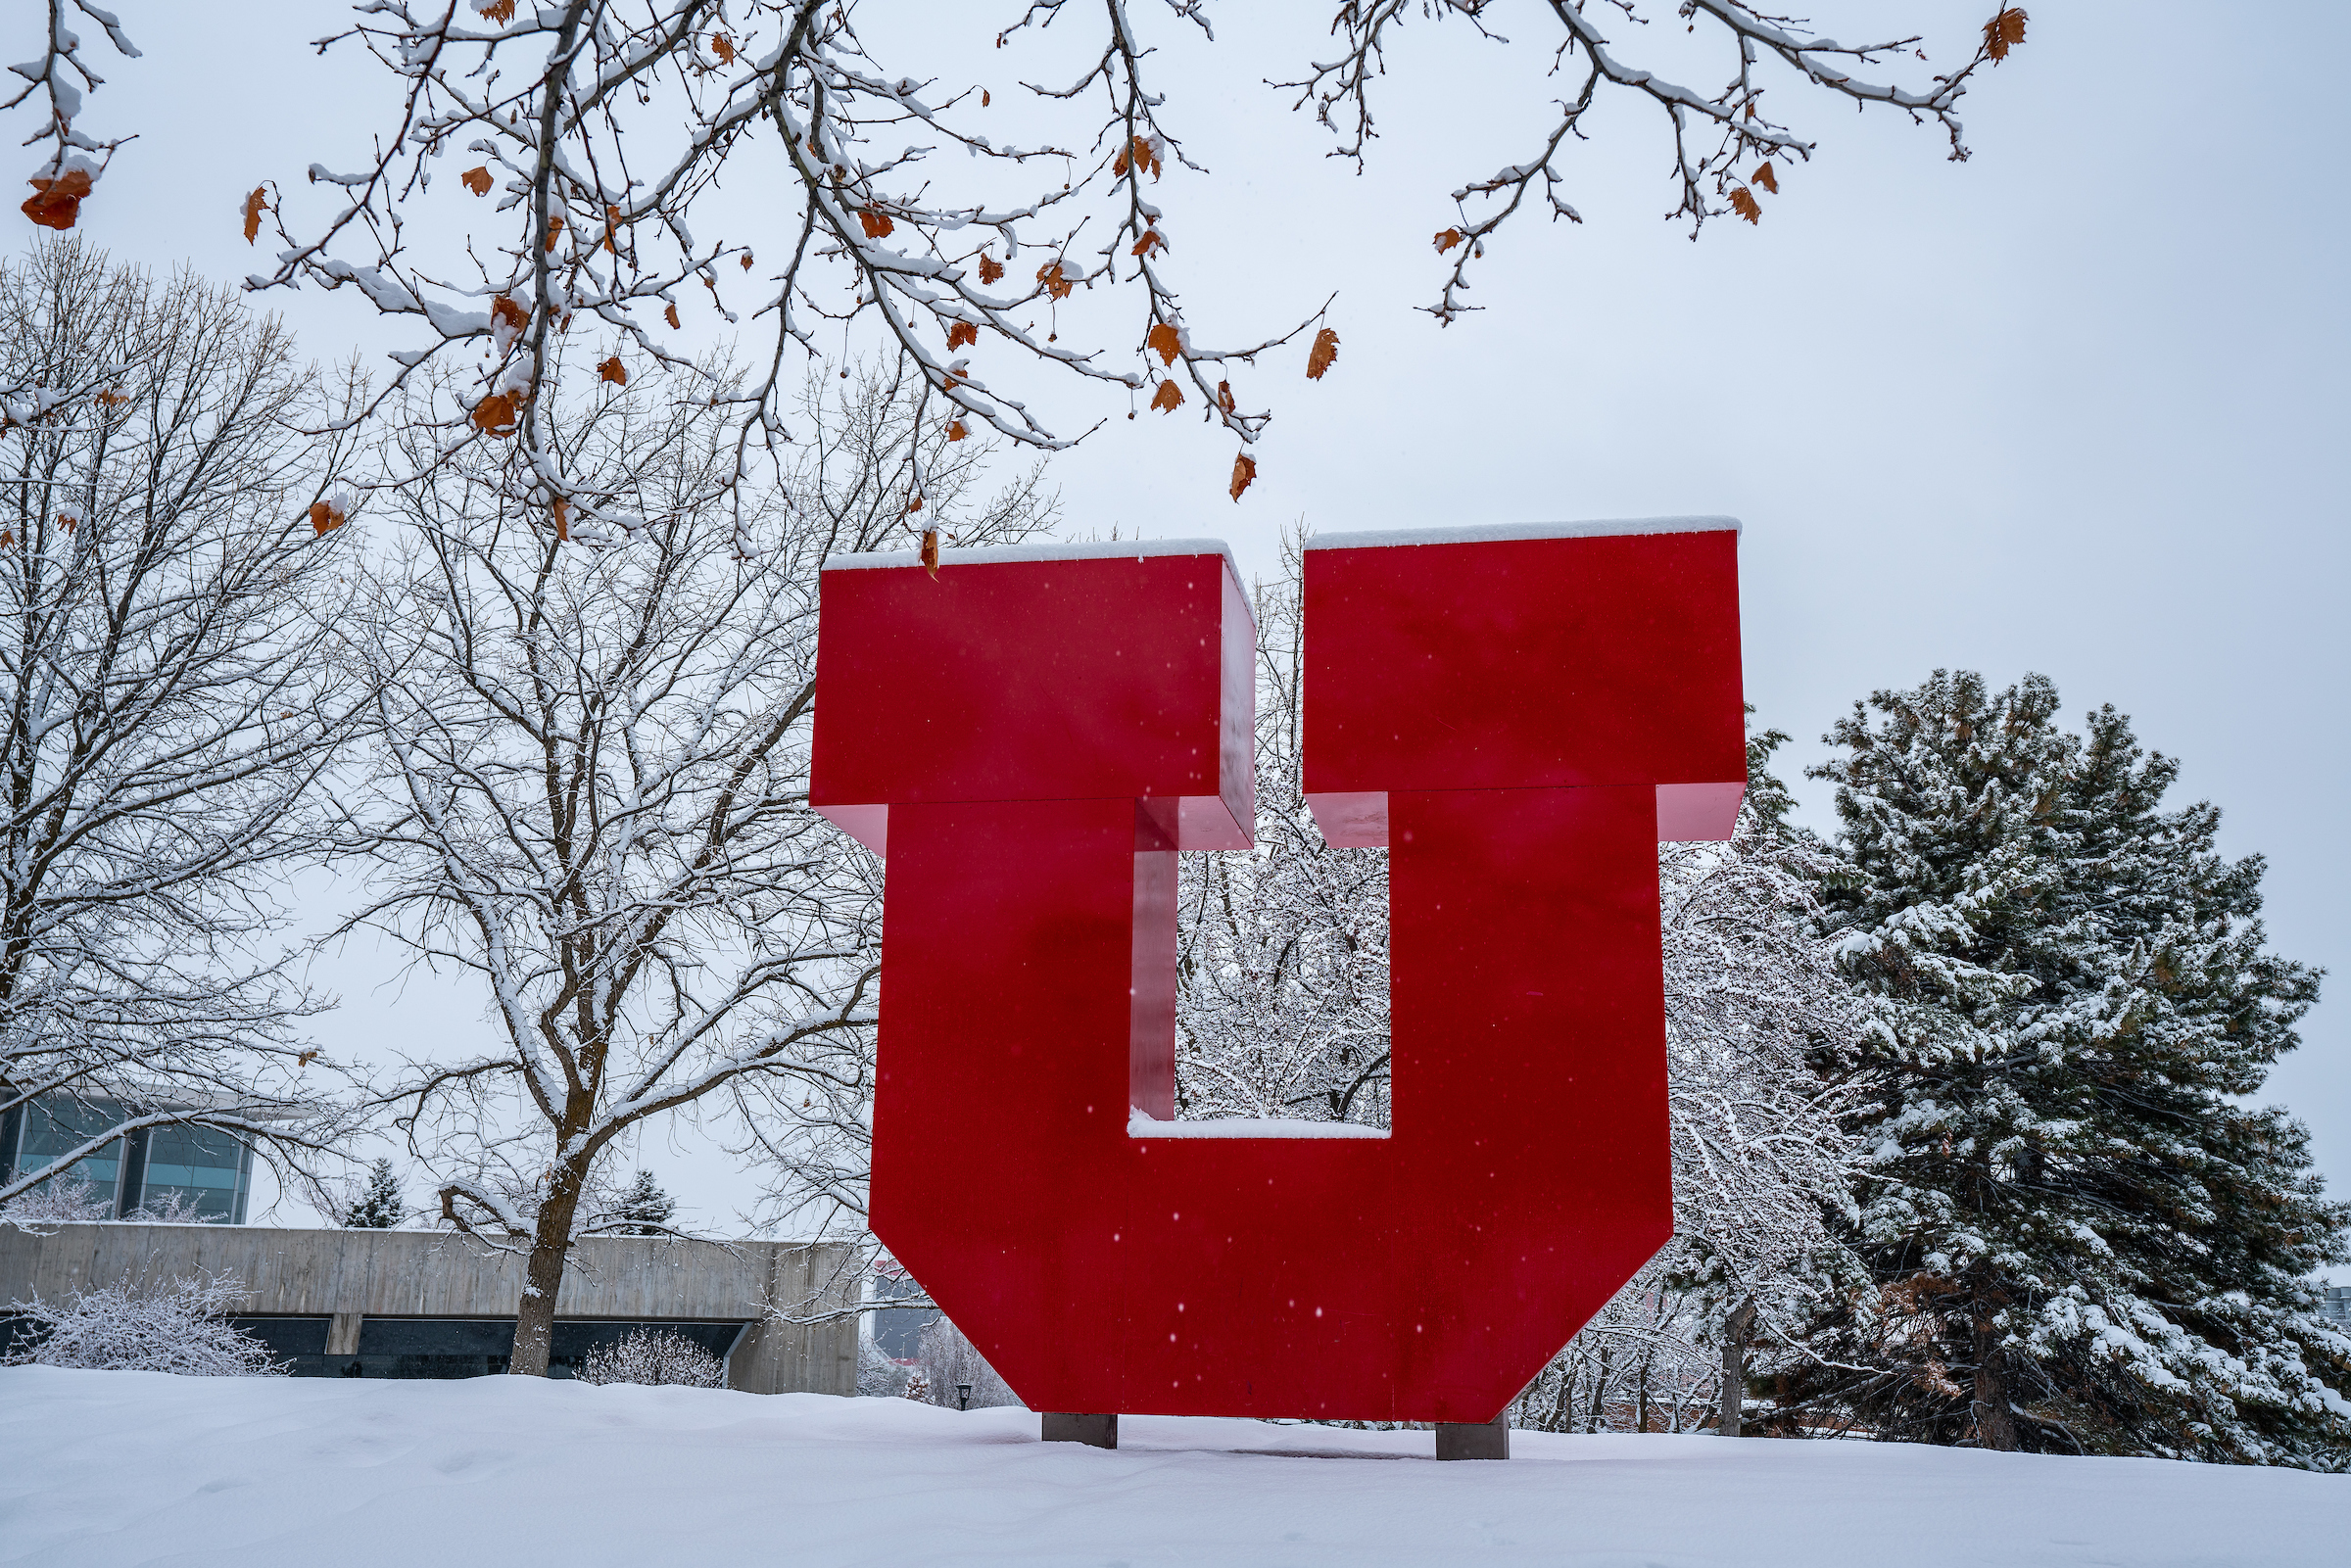 the Block U installation covered in snow